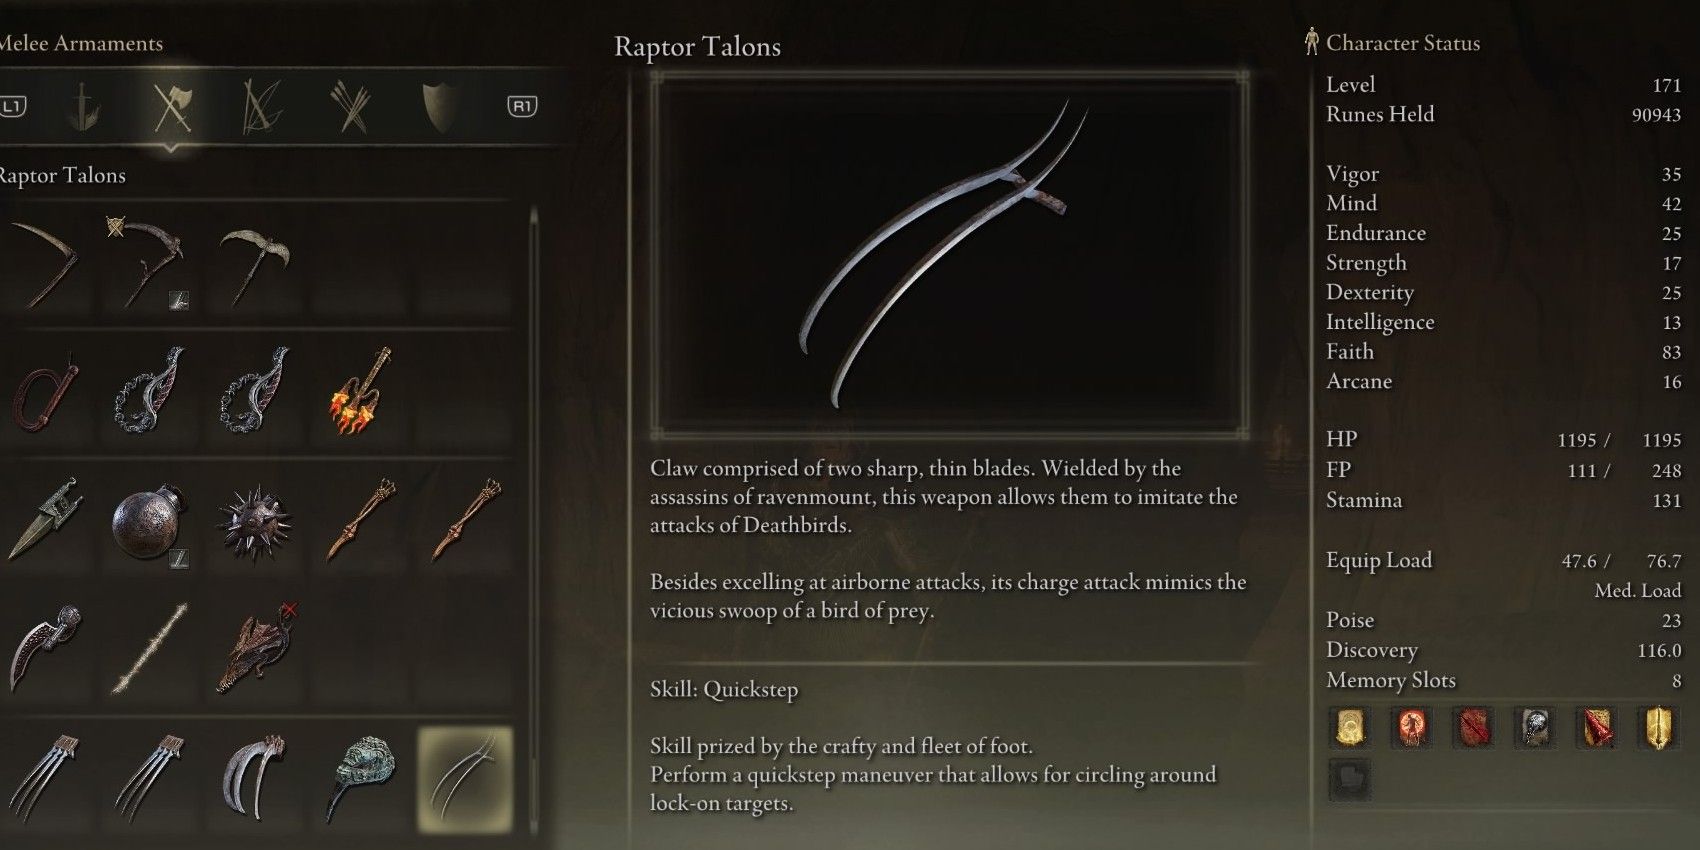 Elden Ring's Raptor Talons scale well with Dexterity and give a damage boost to jump attacks.